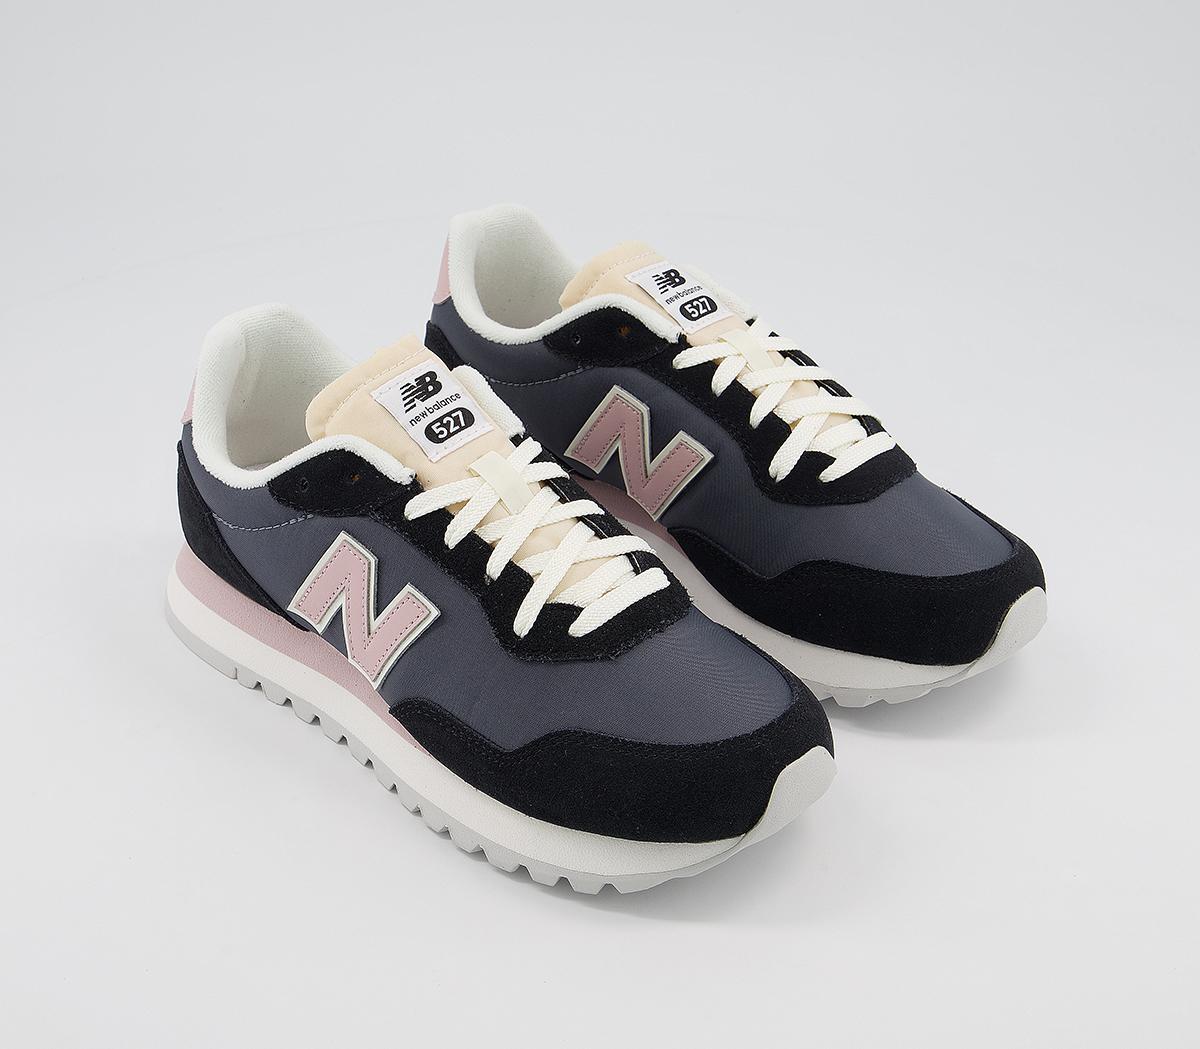 New Balance 527 Trainers Black Saturn Pink - Hers trainers